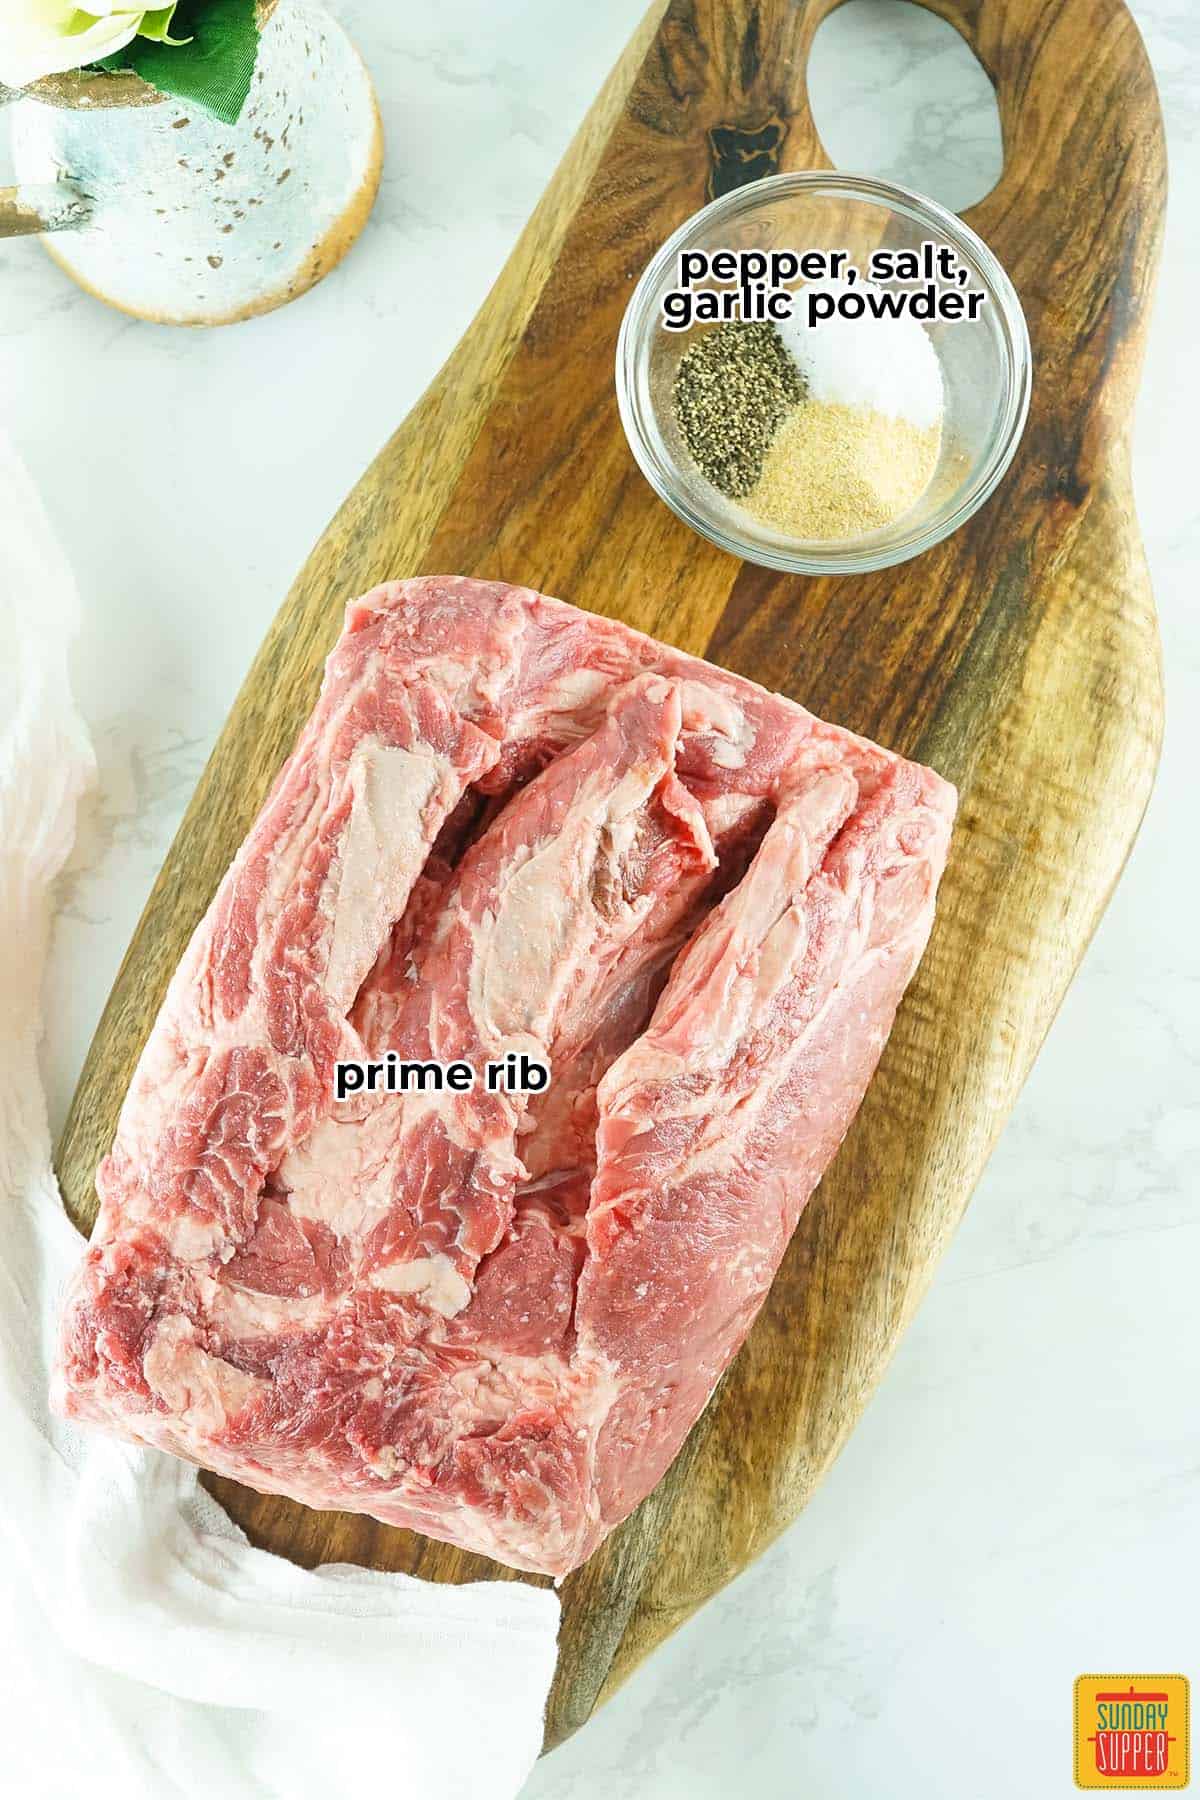 smoked prime rib ingredients with labels